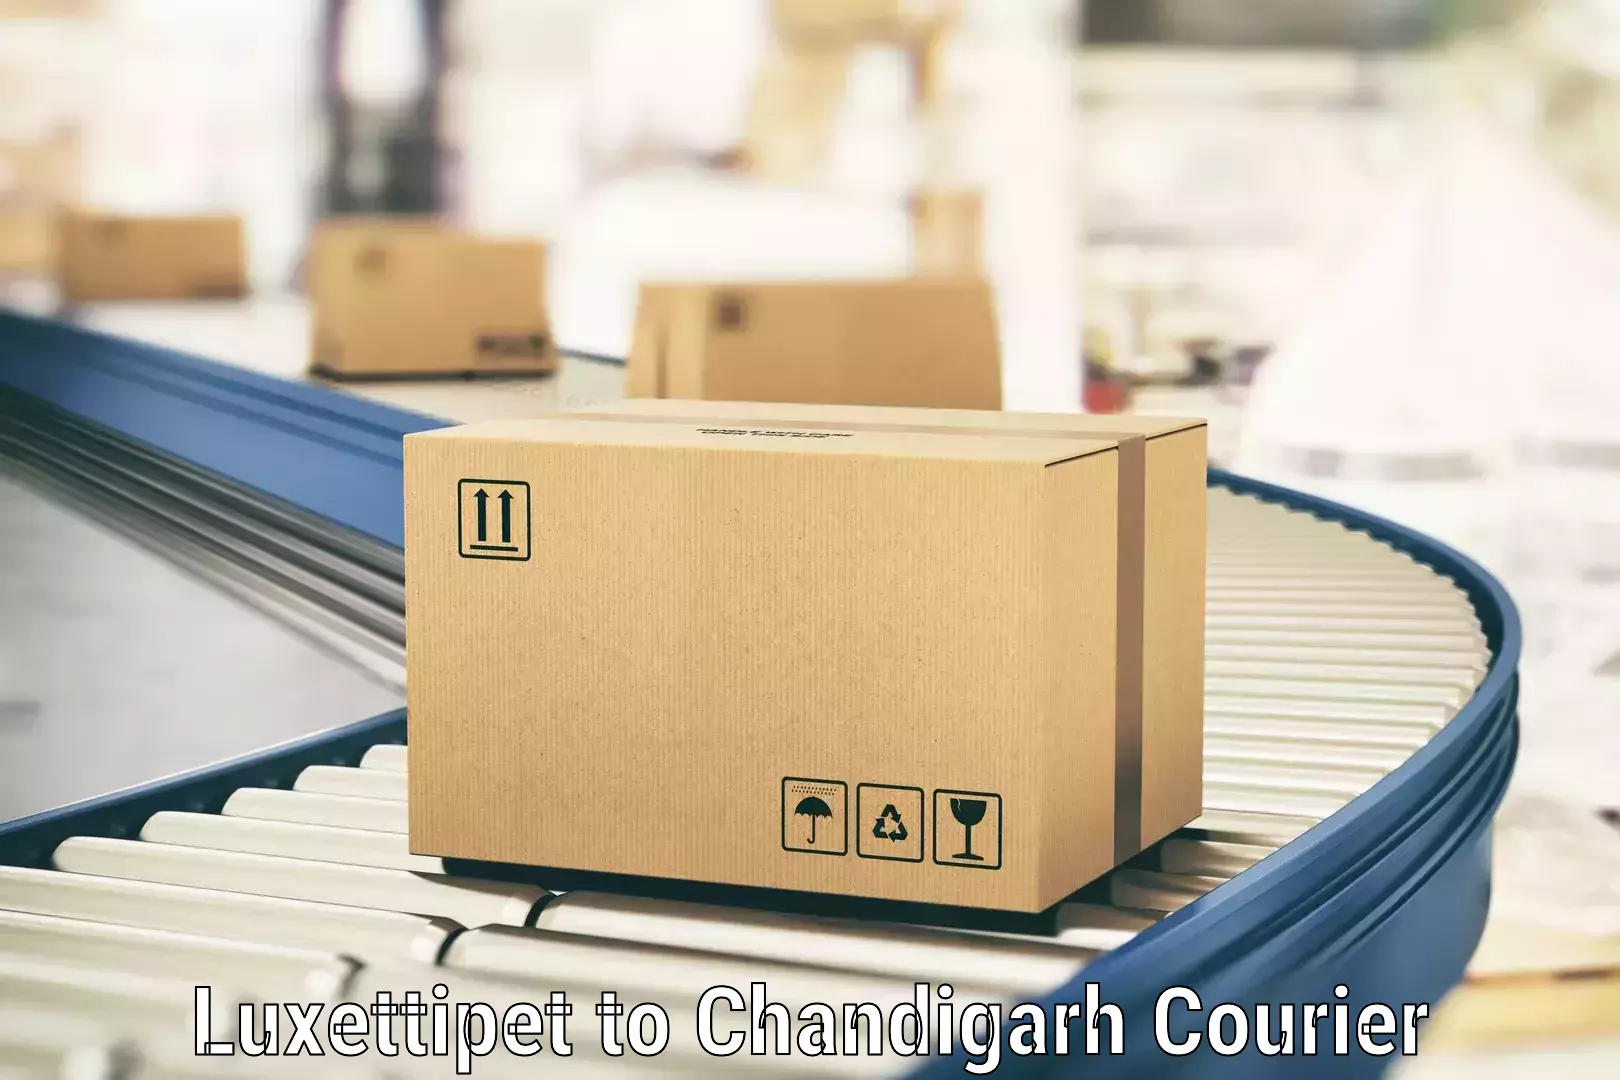 Return courier service Luxettipet to Chandigarh